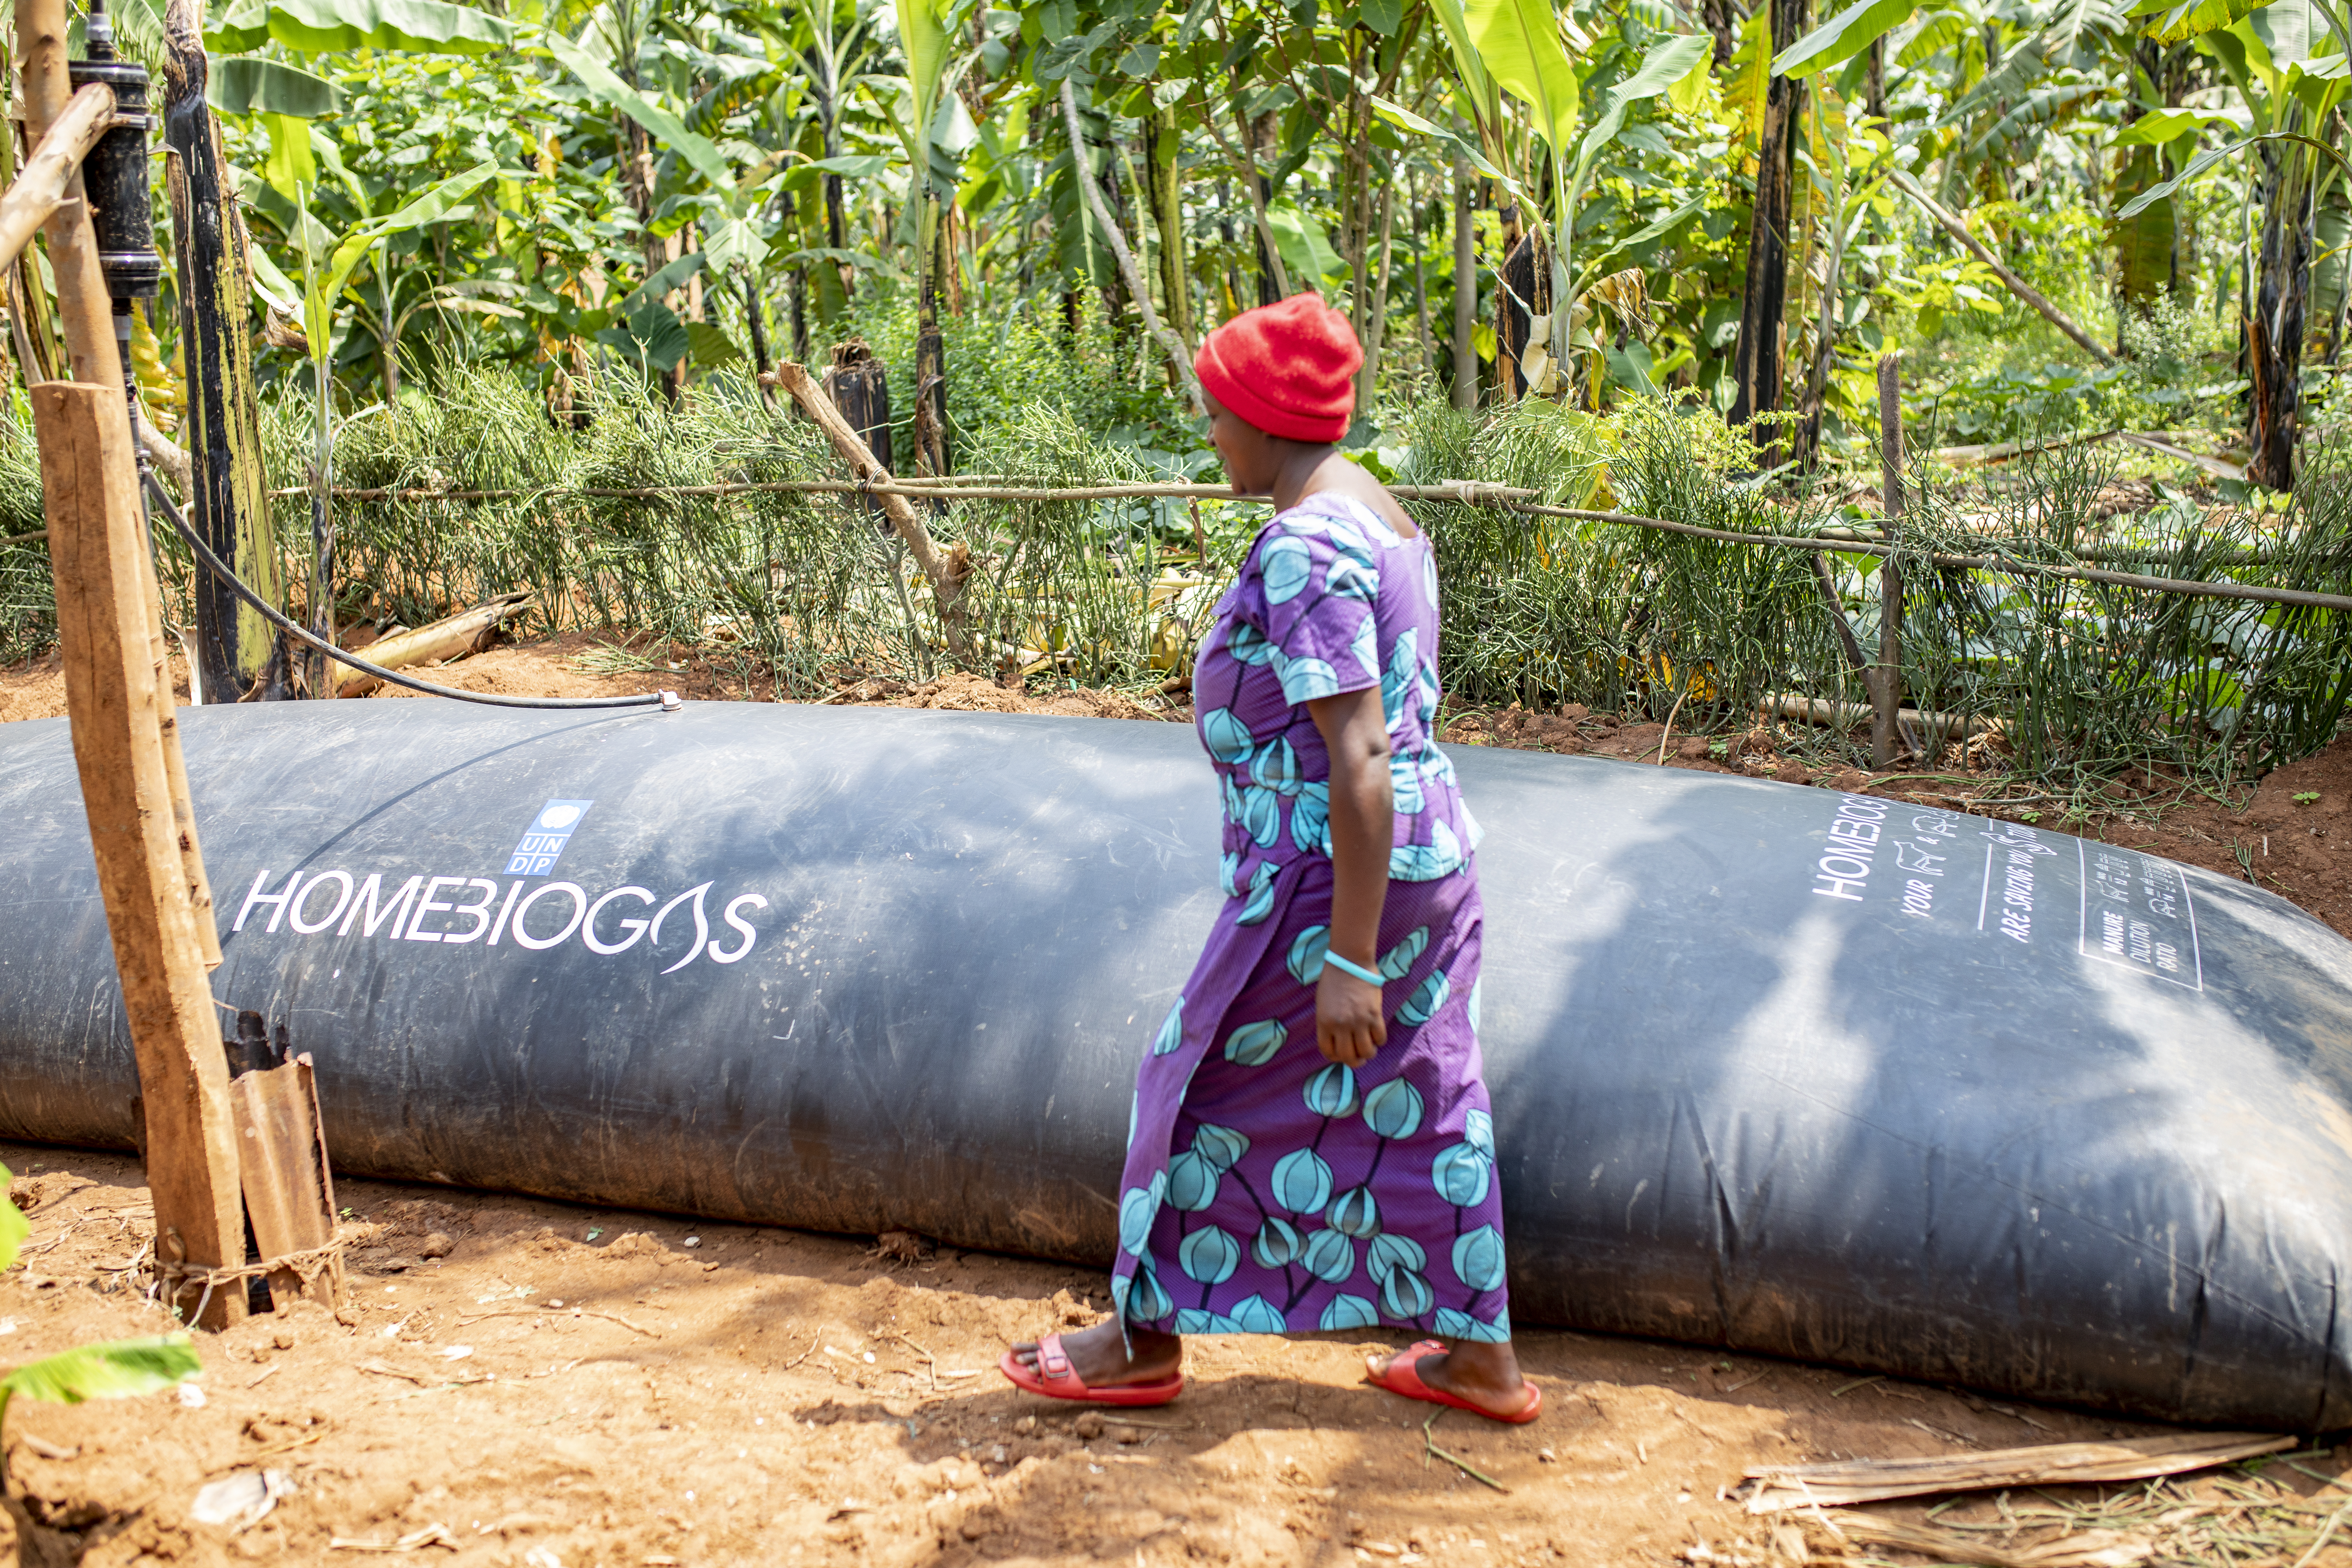 woman walking along side Biogas container